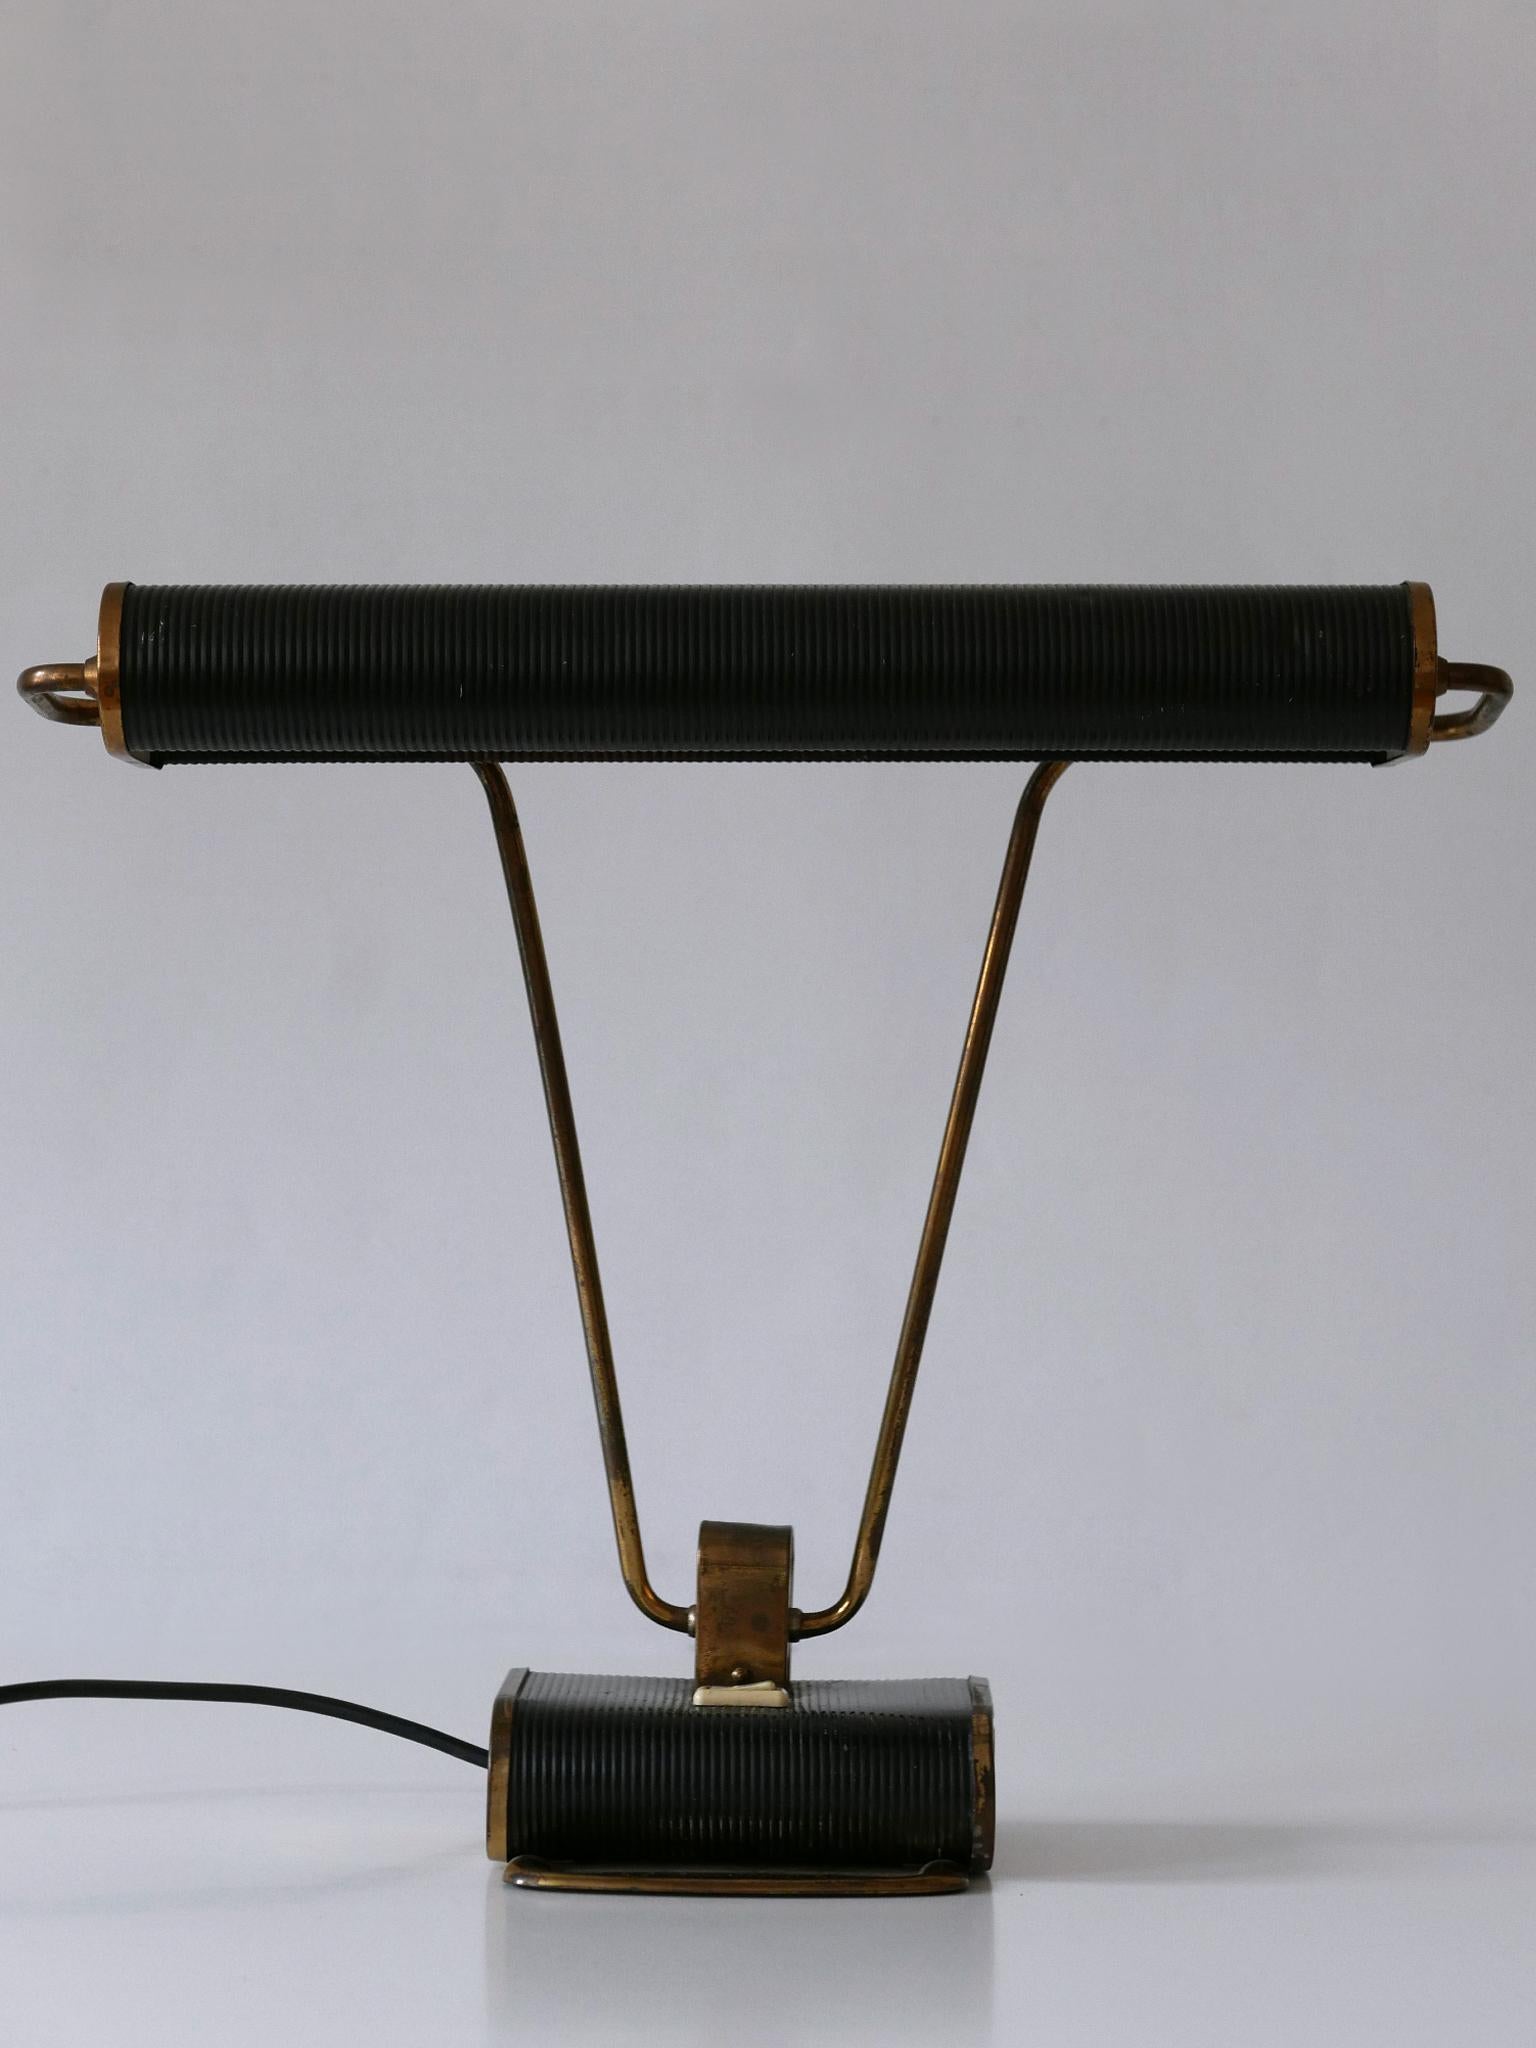 Art Deco Table Lamp or Desk Light 'No 71' by André Mounique for Jumo 1930s For Sale 2